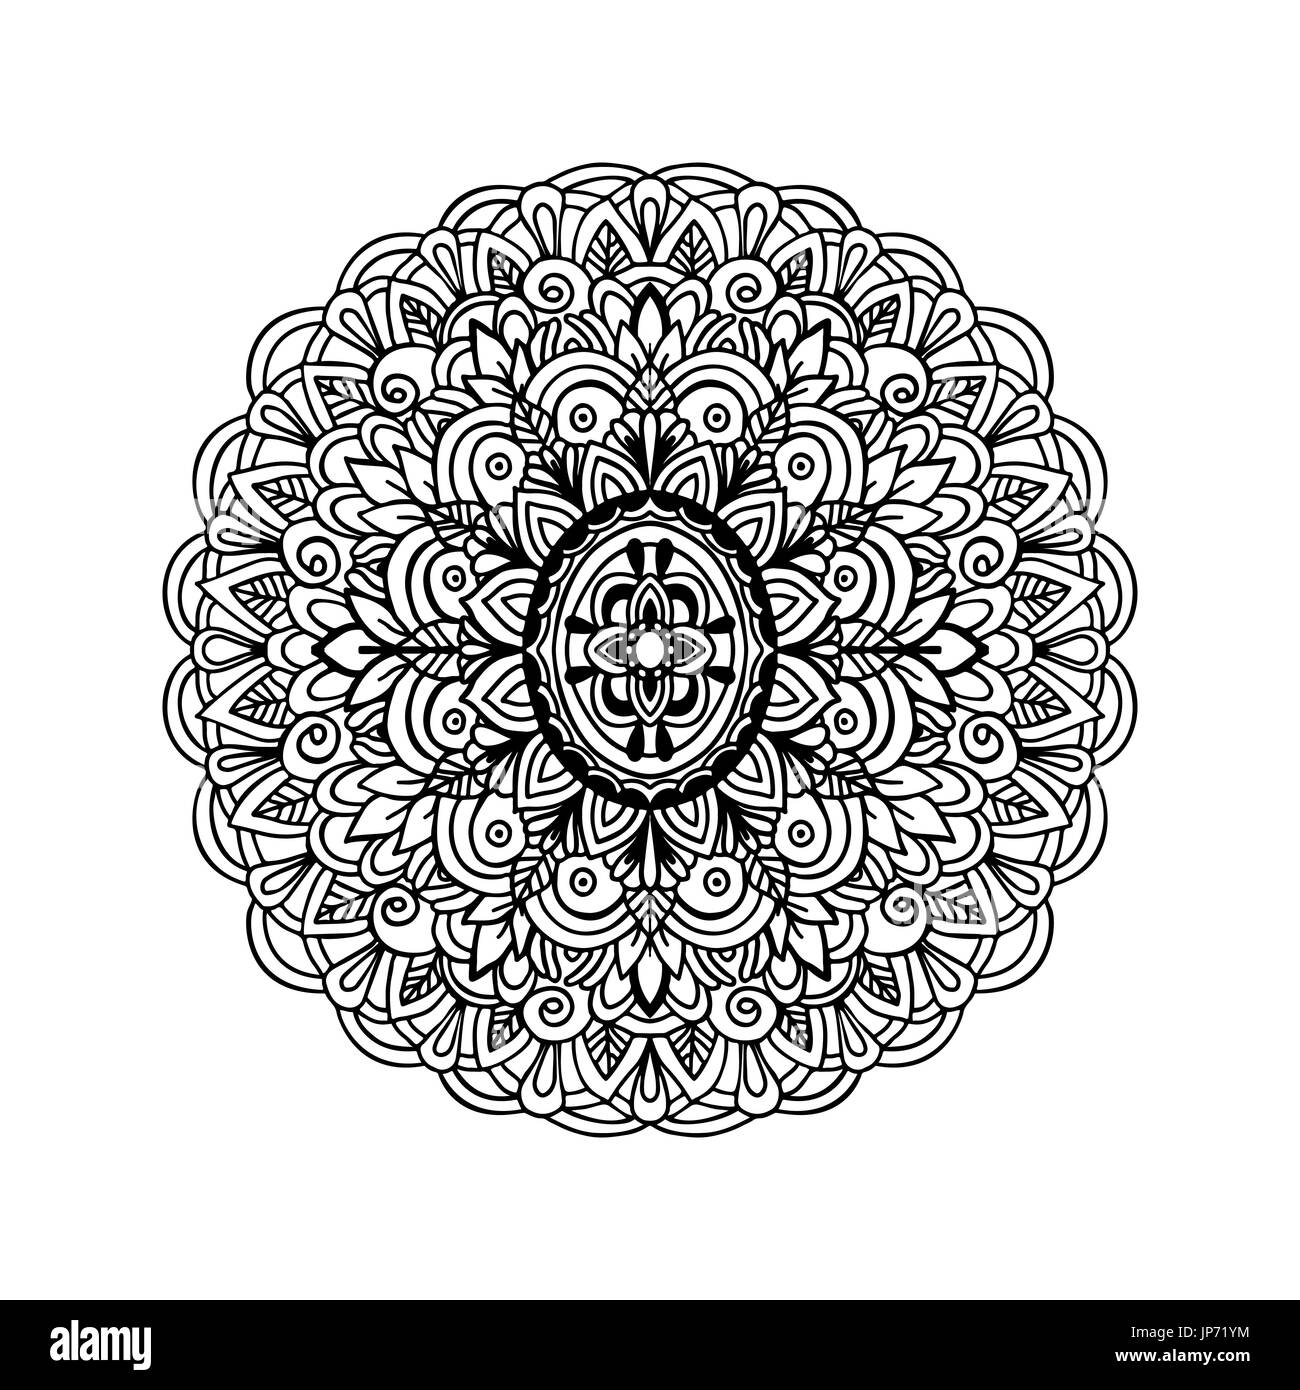 Adult coloring book Black and White Stock Photos & Images - Alamy